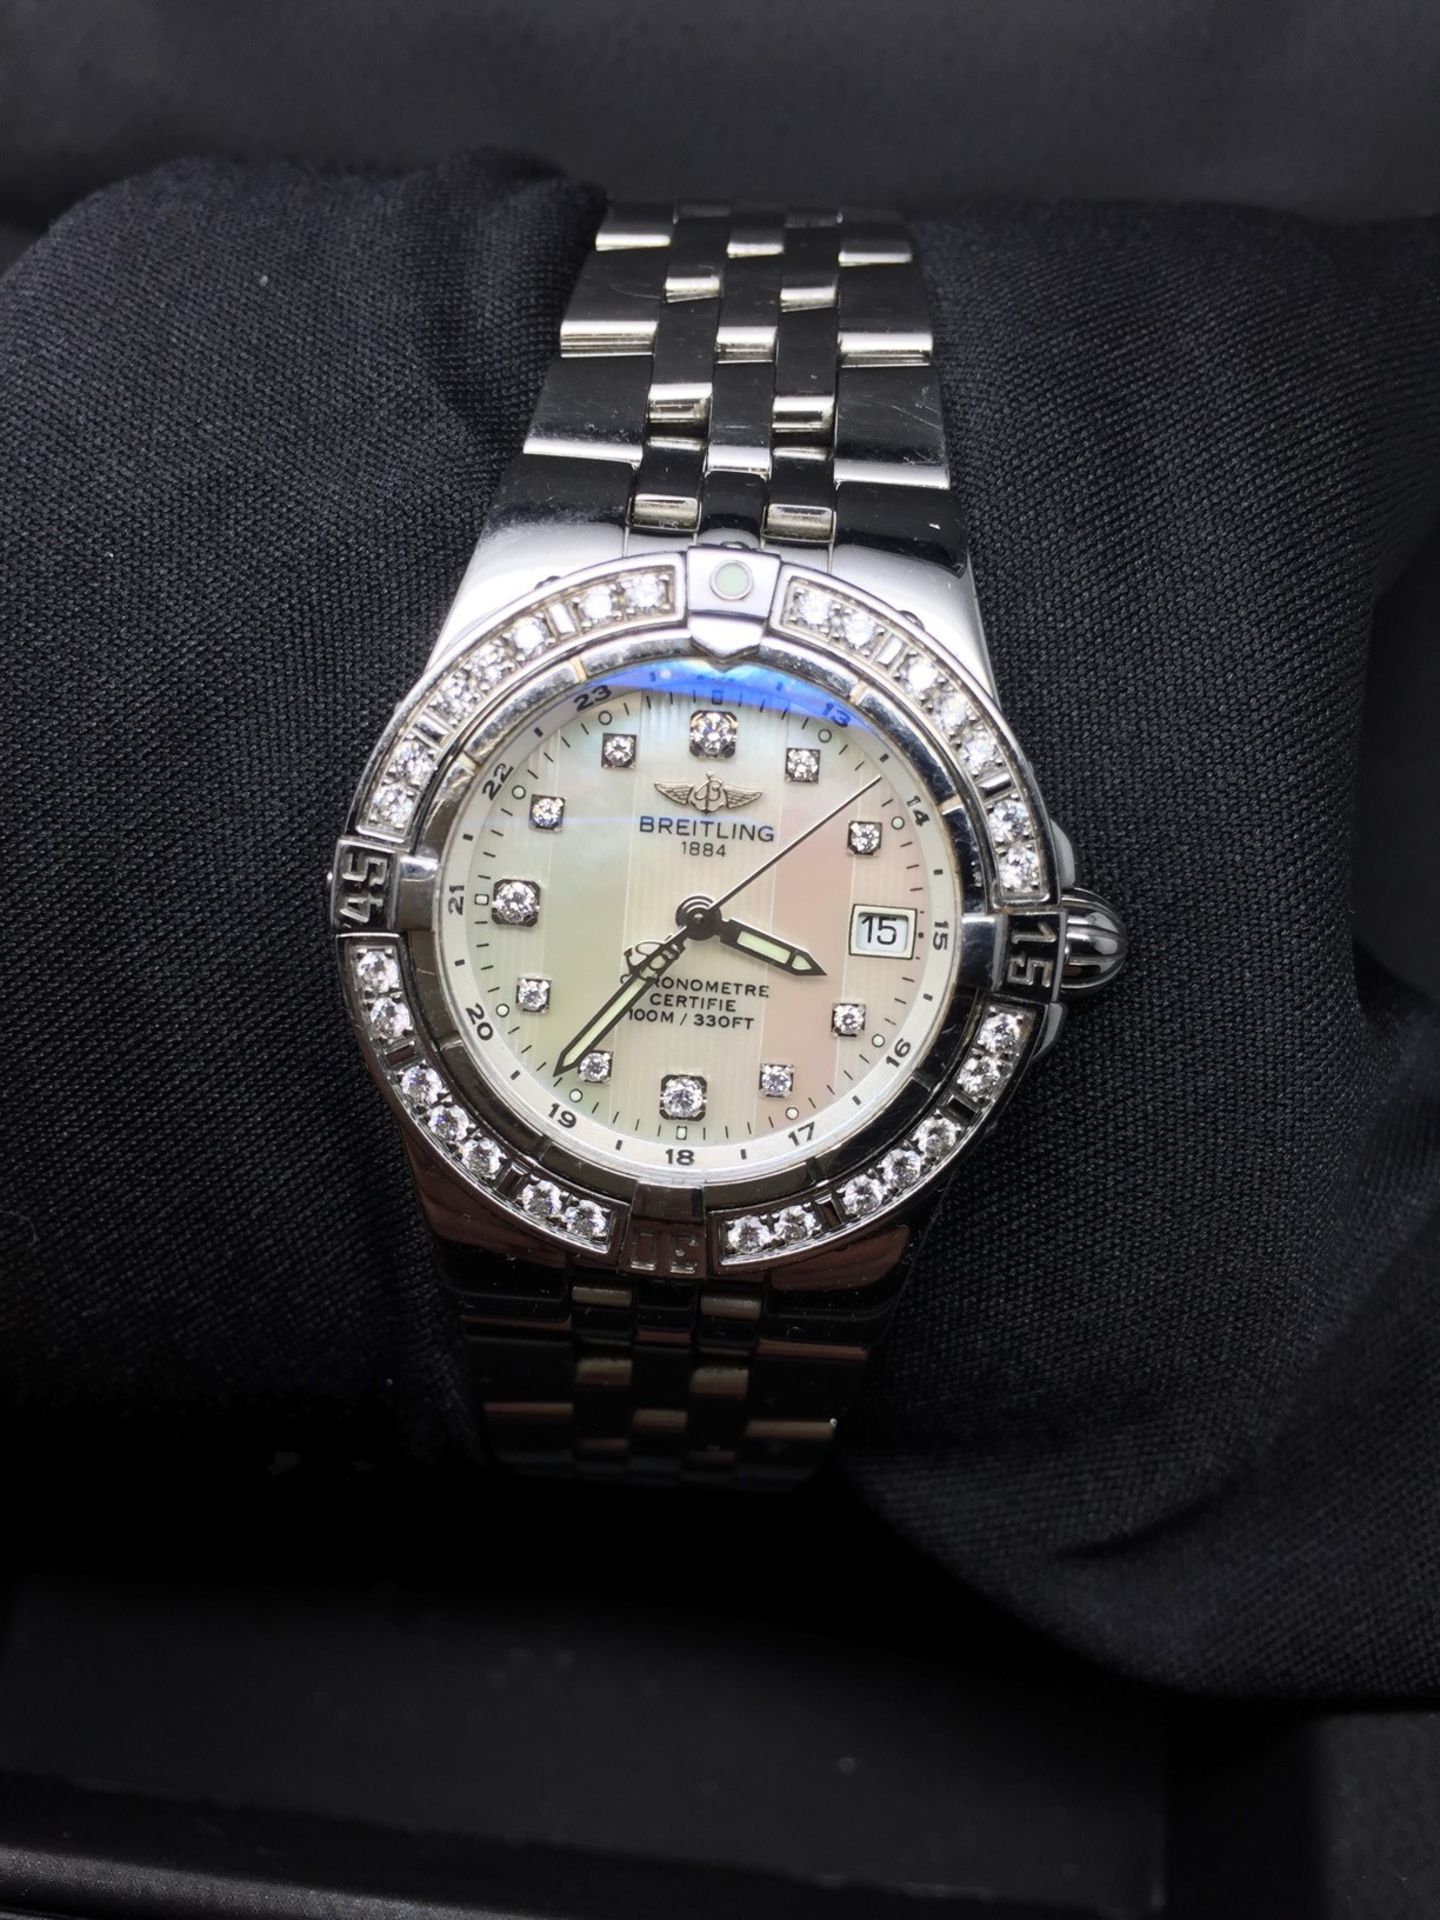 LADIES BREITLING DIAMOND WATCH * STARLINER A7134053 / A602 - Image 8 of 13